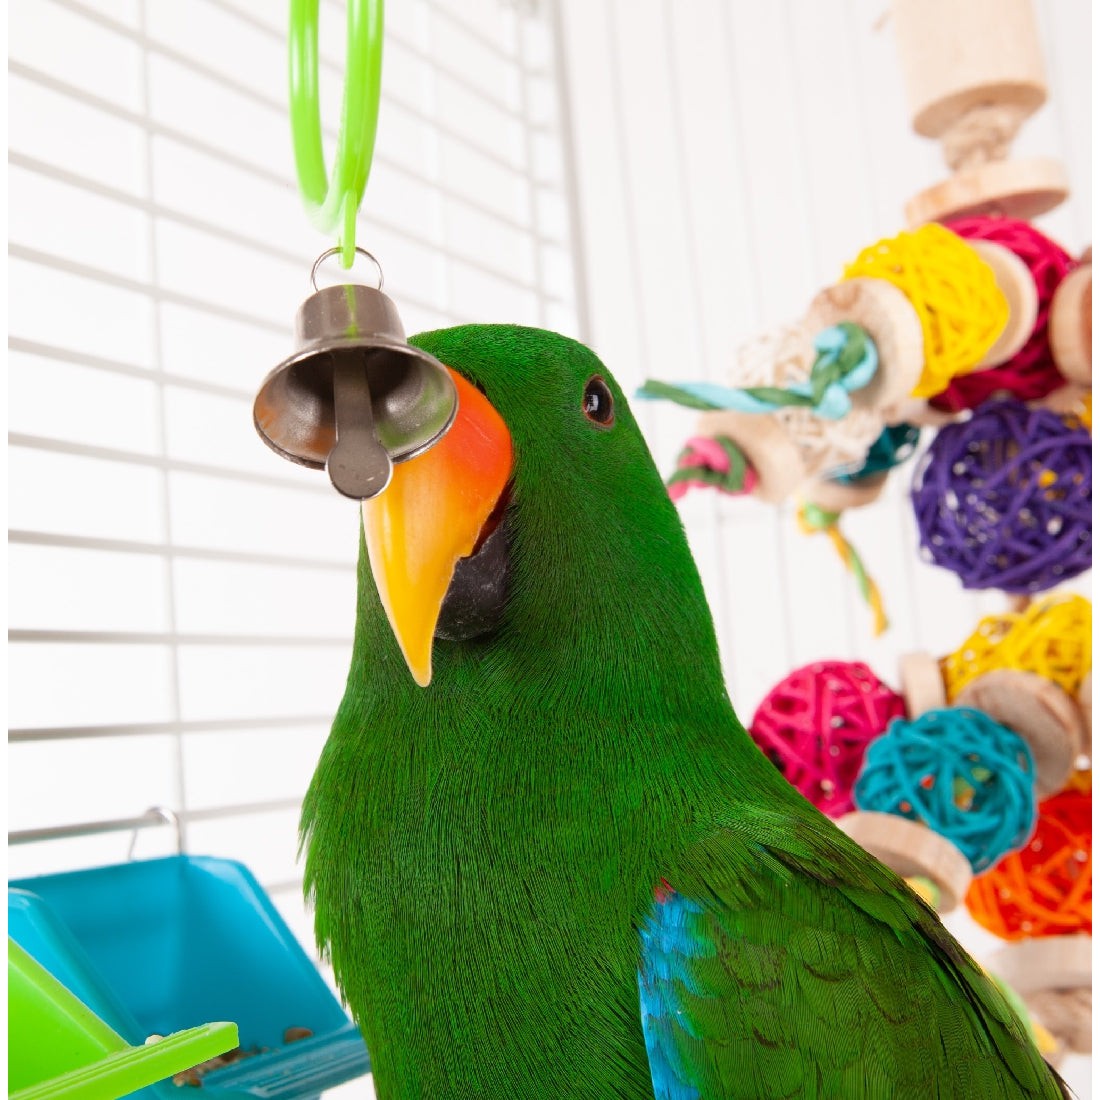 Bright green parrot interacting with bell-type bird toy indoors.